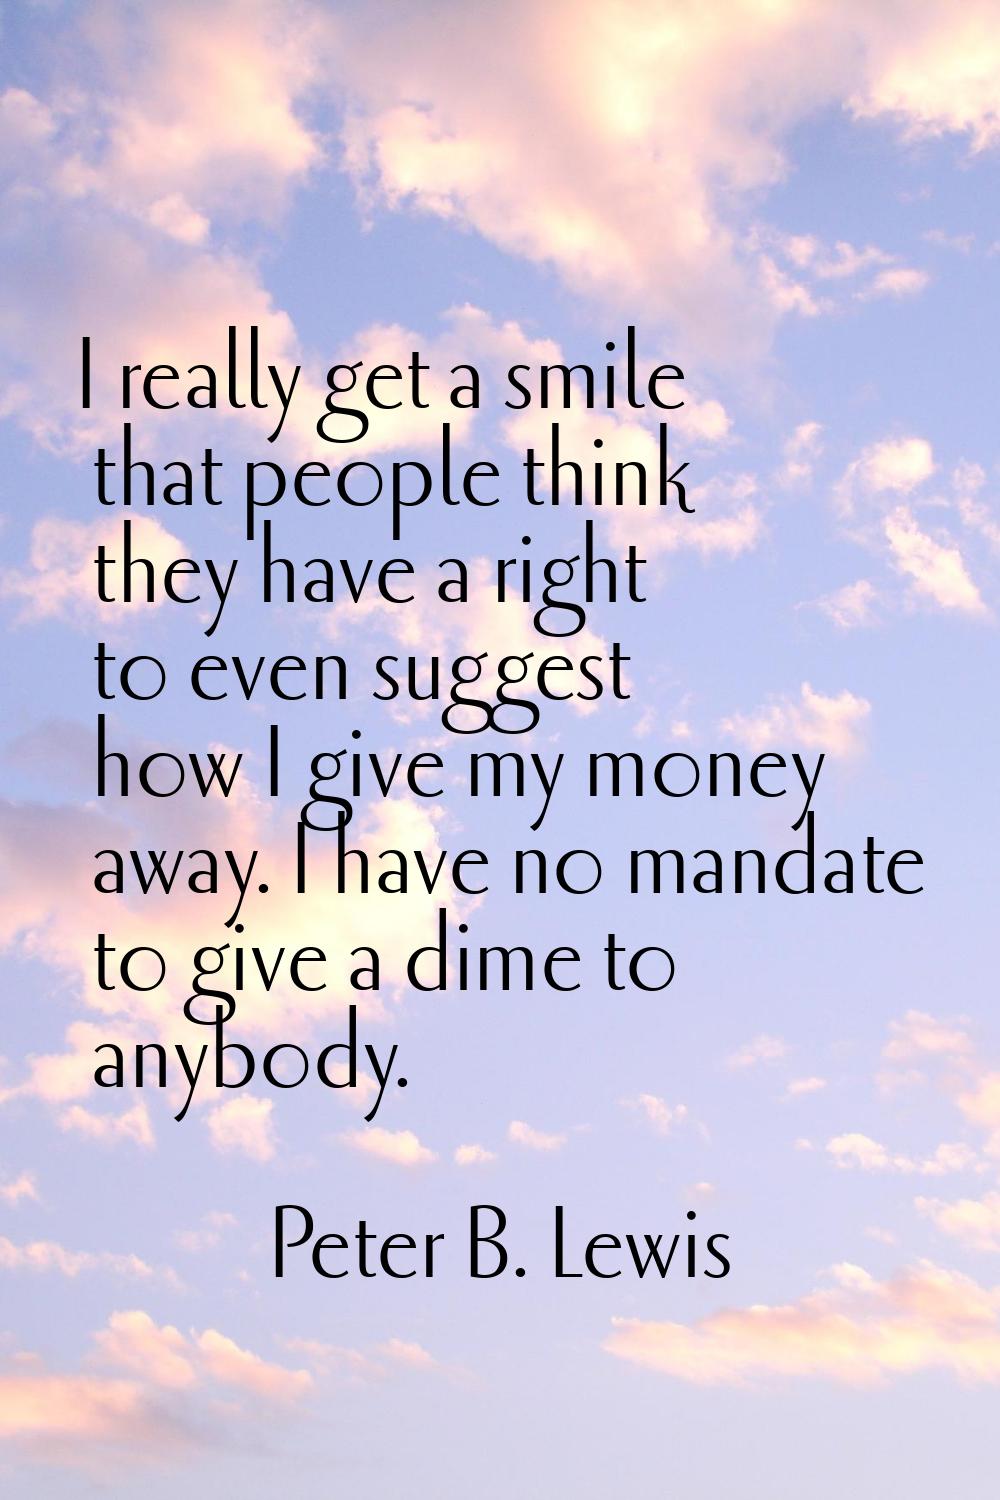 I really get a smile that people think they have a right to even suggest how I give my money away. 